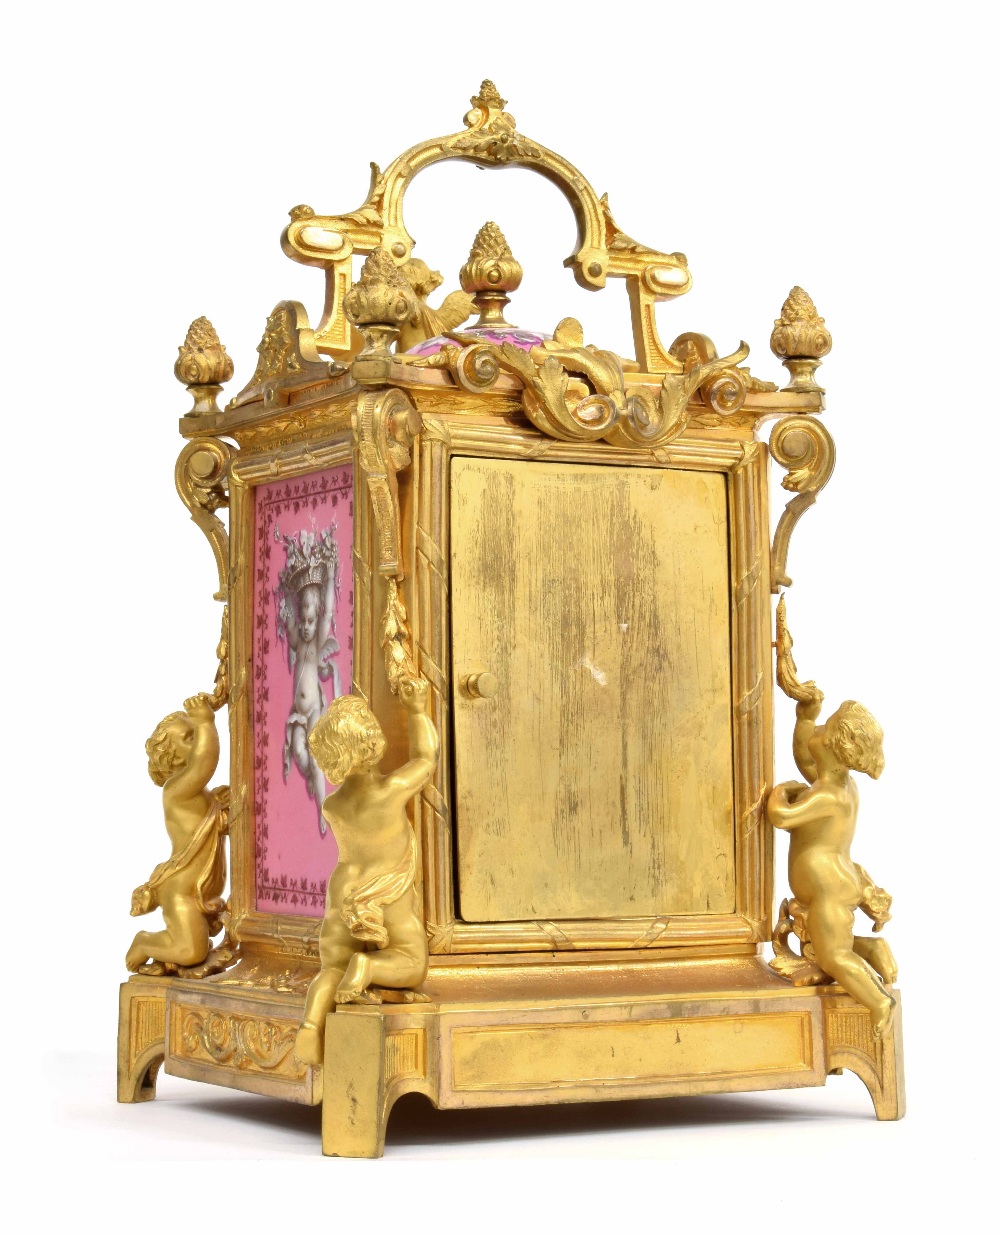 French exhibition giant gilt-bronze and porcelain mounted striking carriage clock, Japy Freres et - Image 3 of 4